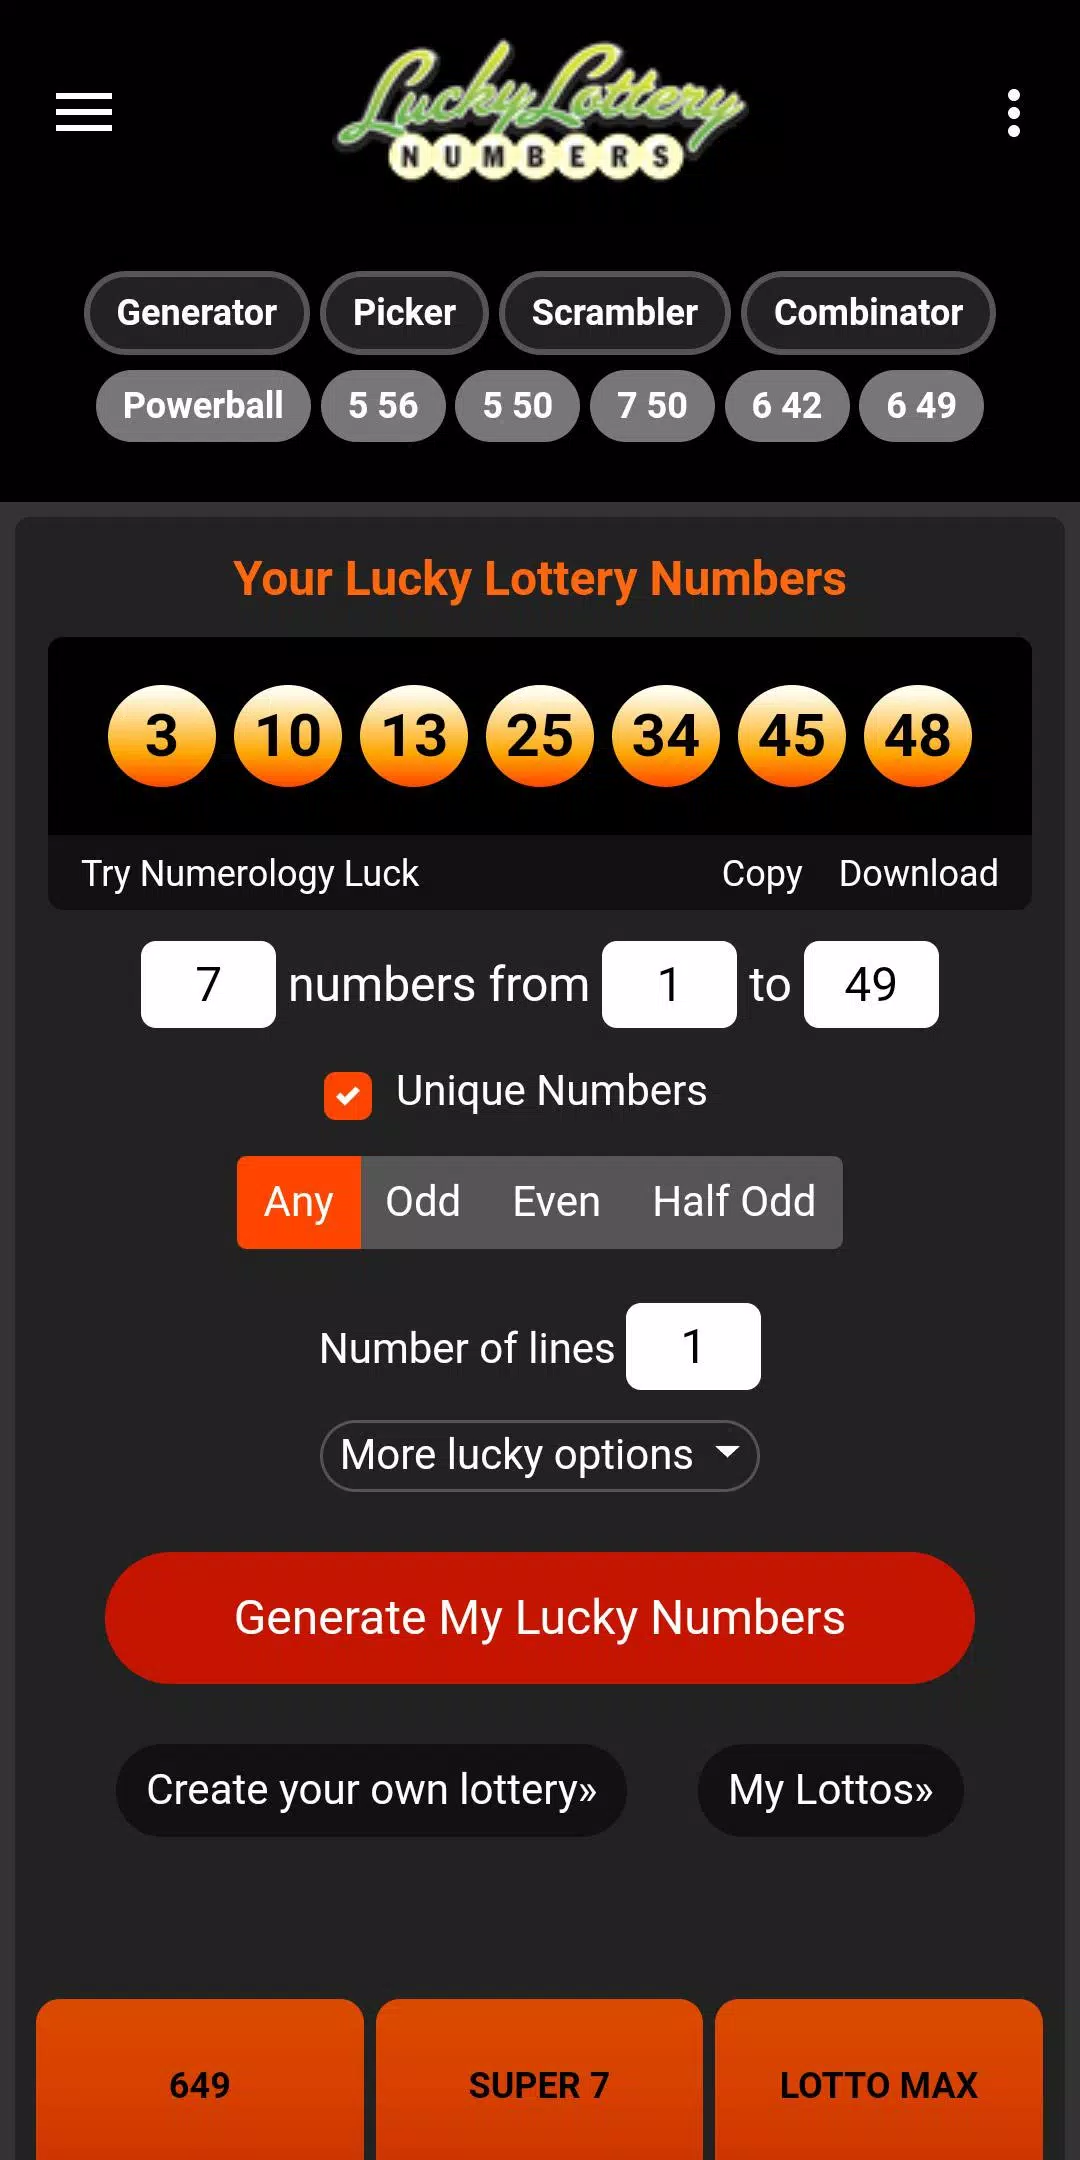 Download do APK de Lucky Lottery Number Generator para Android